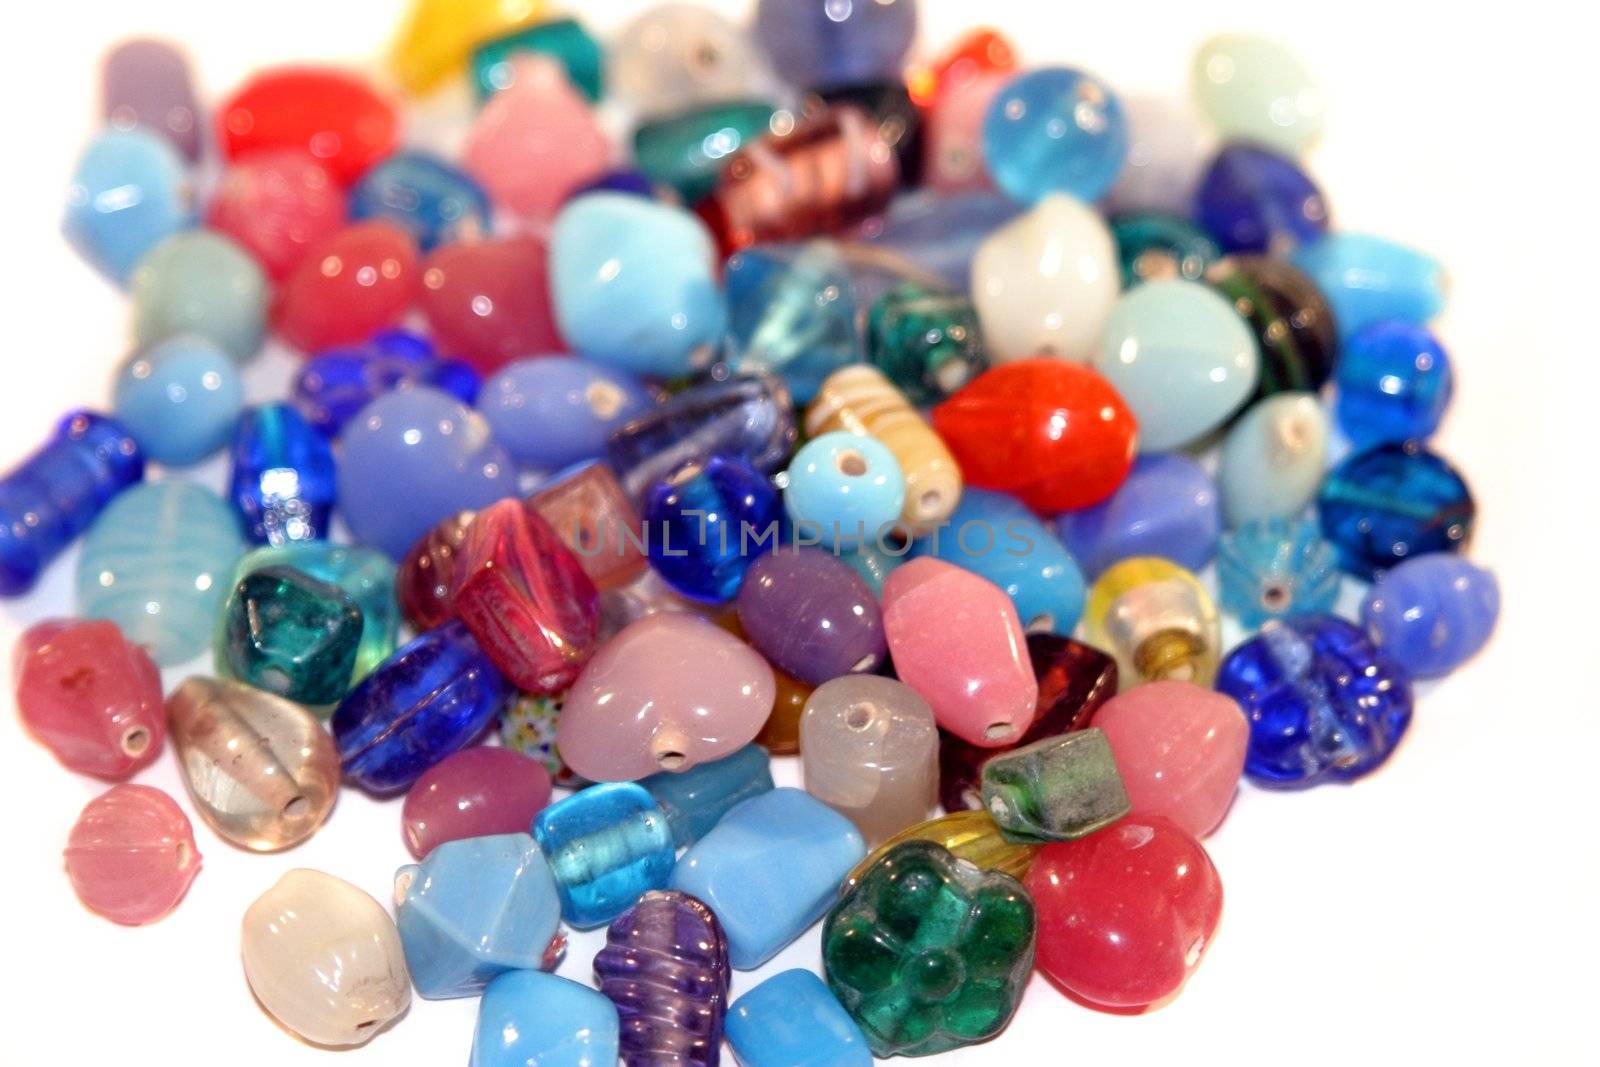 Colorful gemstones in a pile on white background.